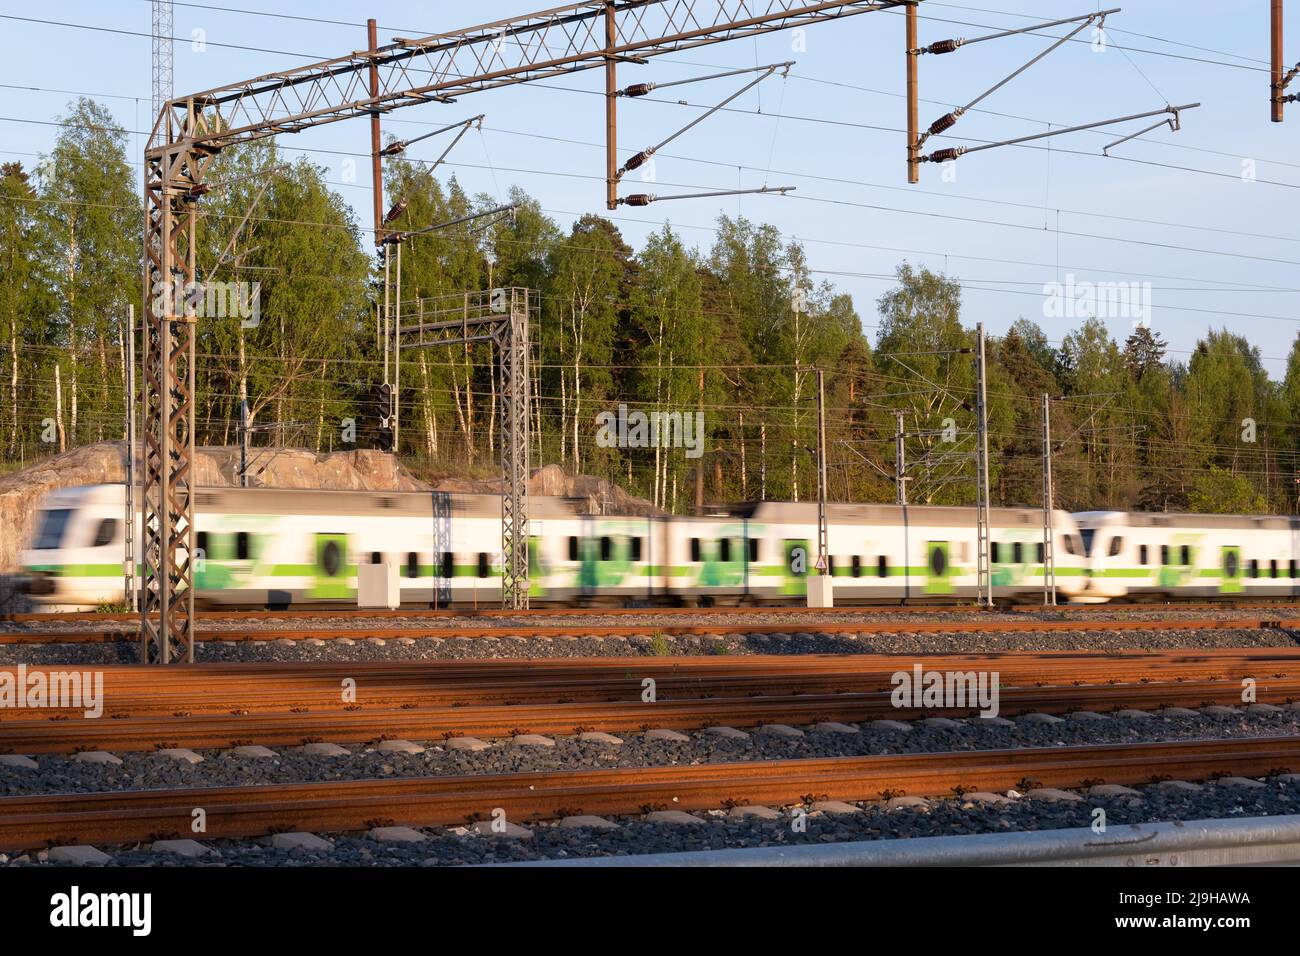 Helsinki / Finland - MAY 22, 2022: Unfocus train passing by a railway junction during the sunset Stock Photo